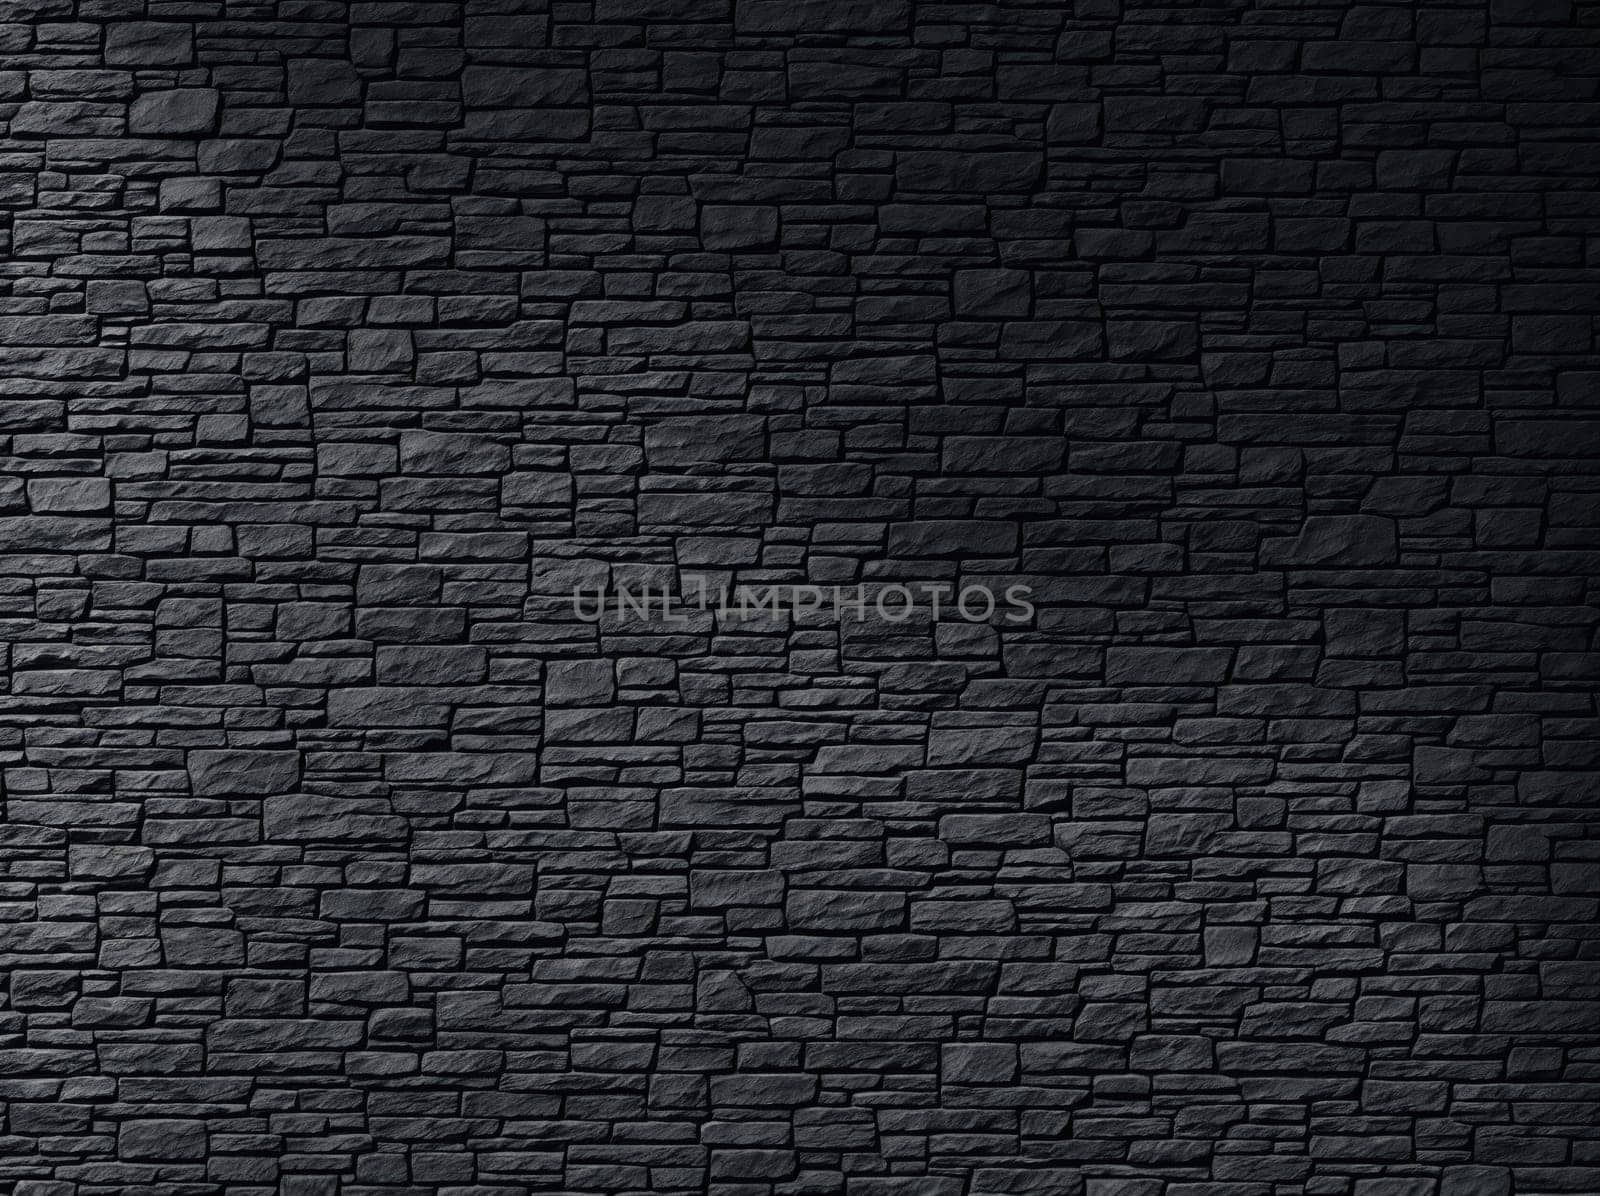 A grey brick wall with no visible texture or details. by creart